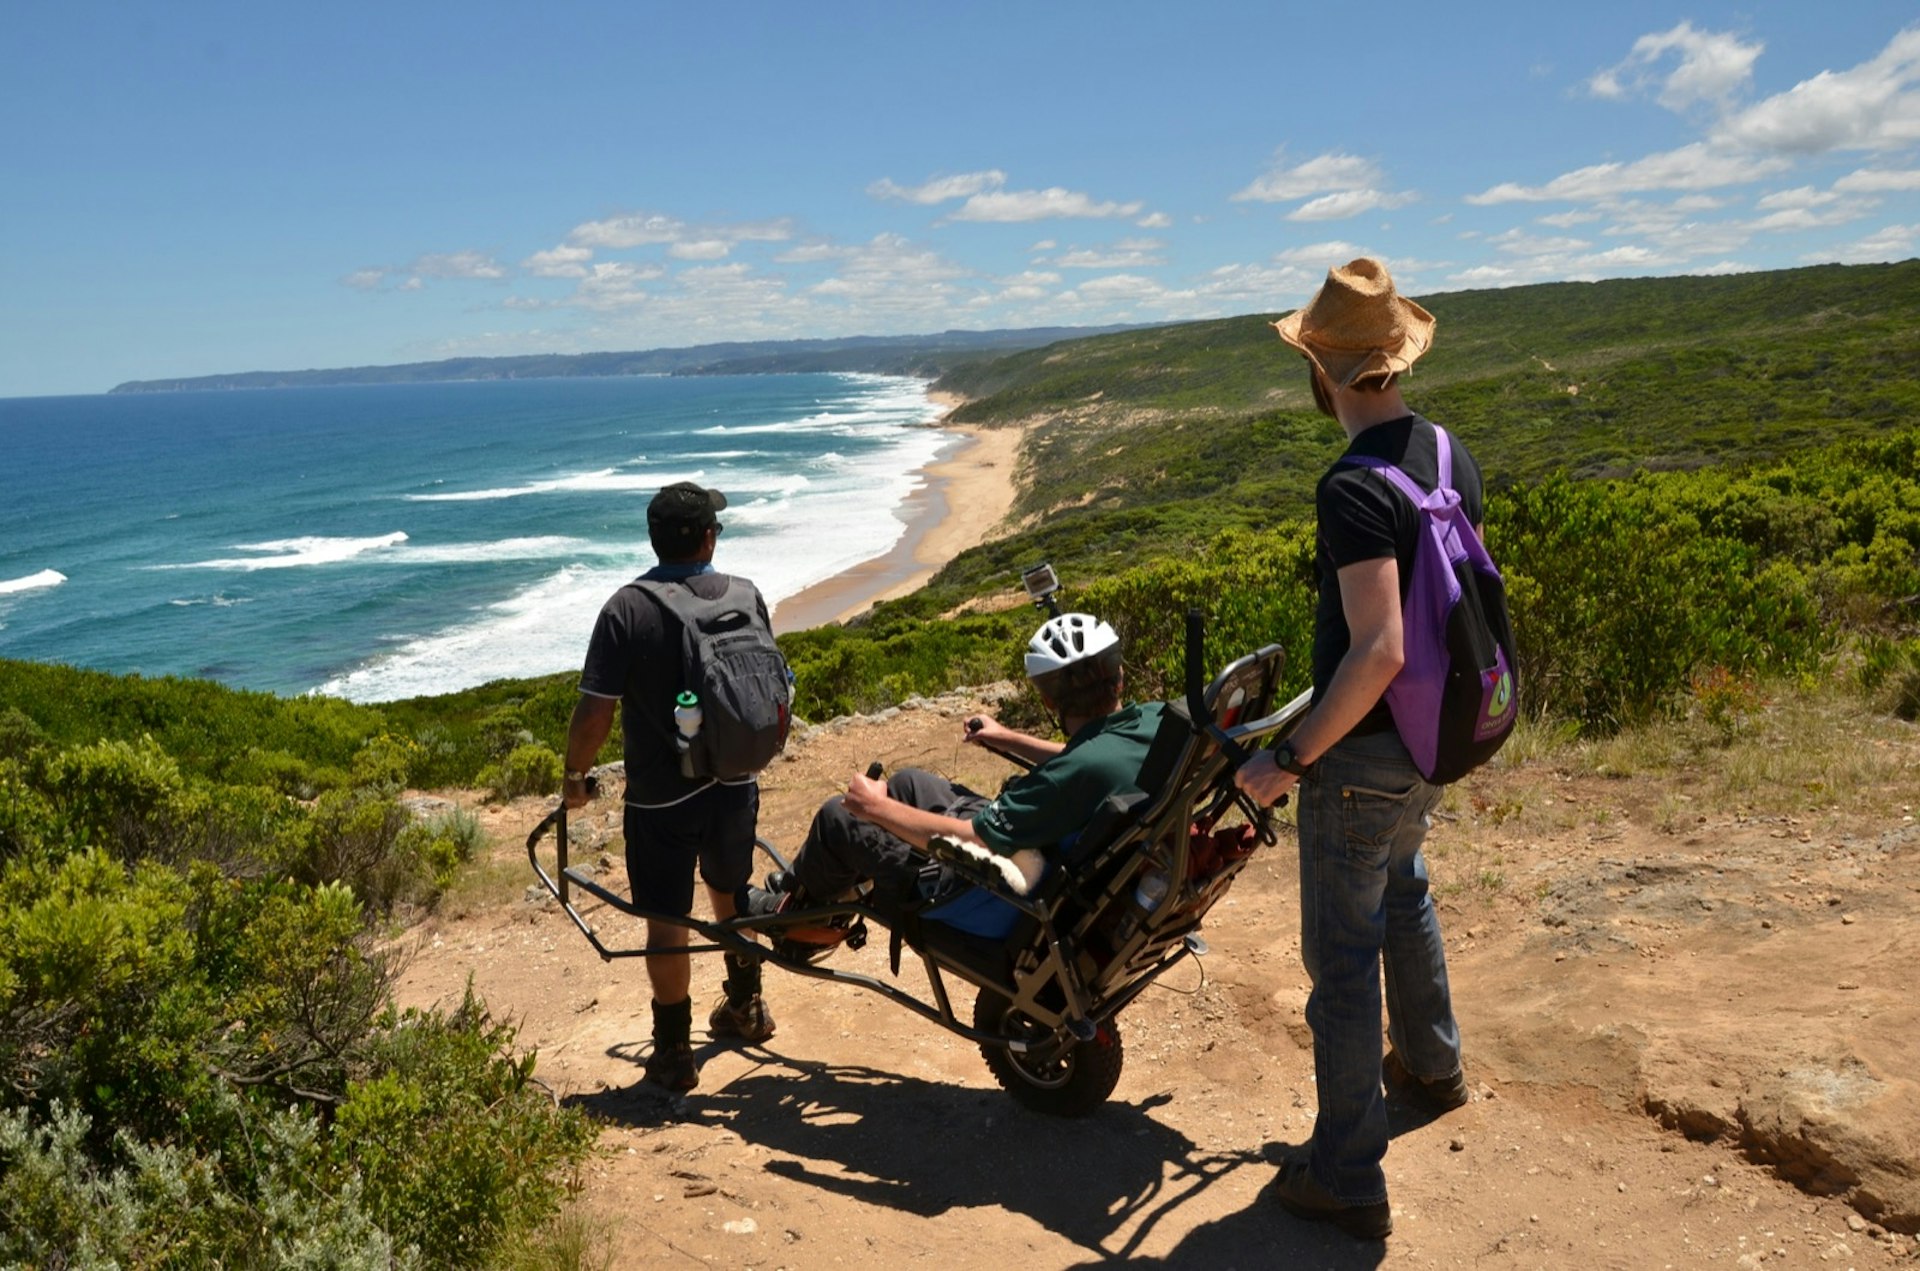 Three people are on a bluff over looking the ocean, one is in a two-wheel wheel chair, one holds the front and the other stands at the back of the wheelchair working to make Australia Accessible; accessible Australia